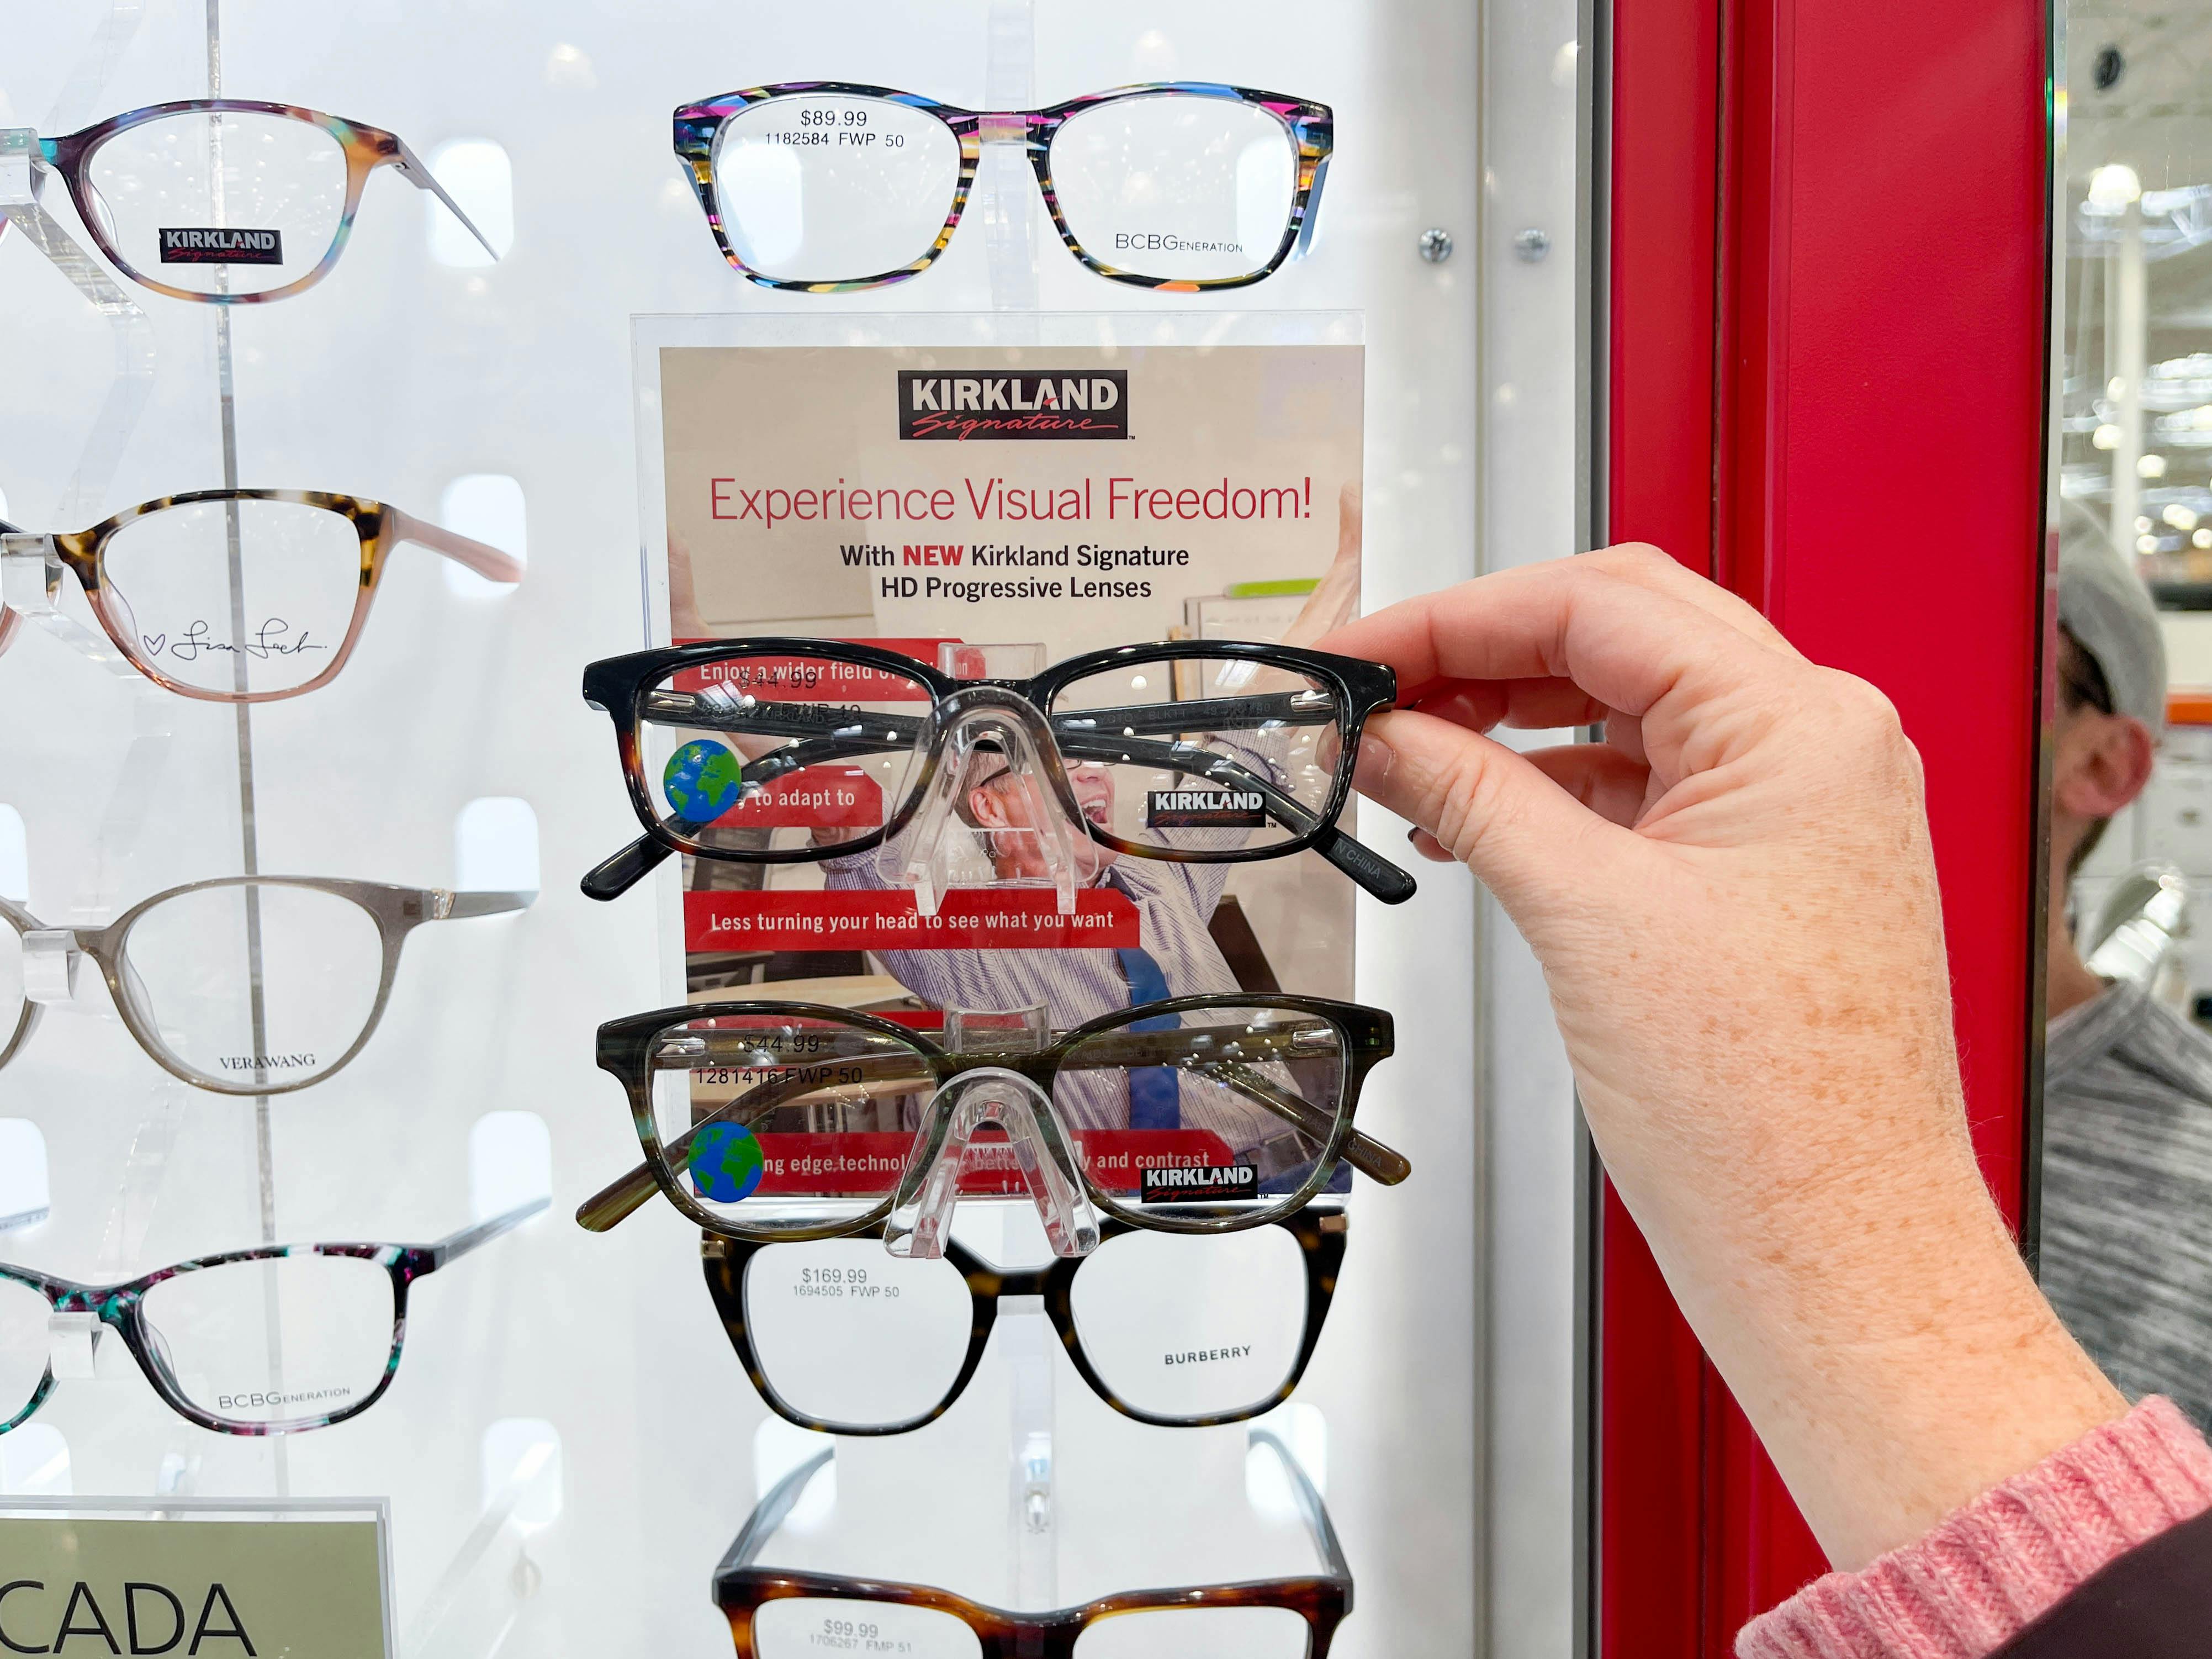 Select Costco Locations Are Selling Cartier Frames! Check Out Your Local Costco  Optical Department For Our Beautiful New Cartier Frames… Selling $500-750  Below Retail R/Costco 